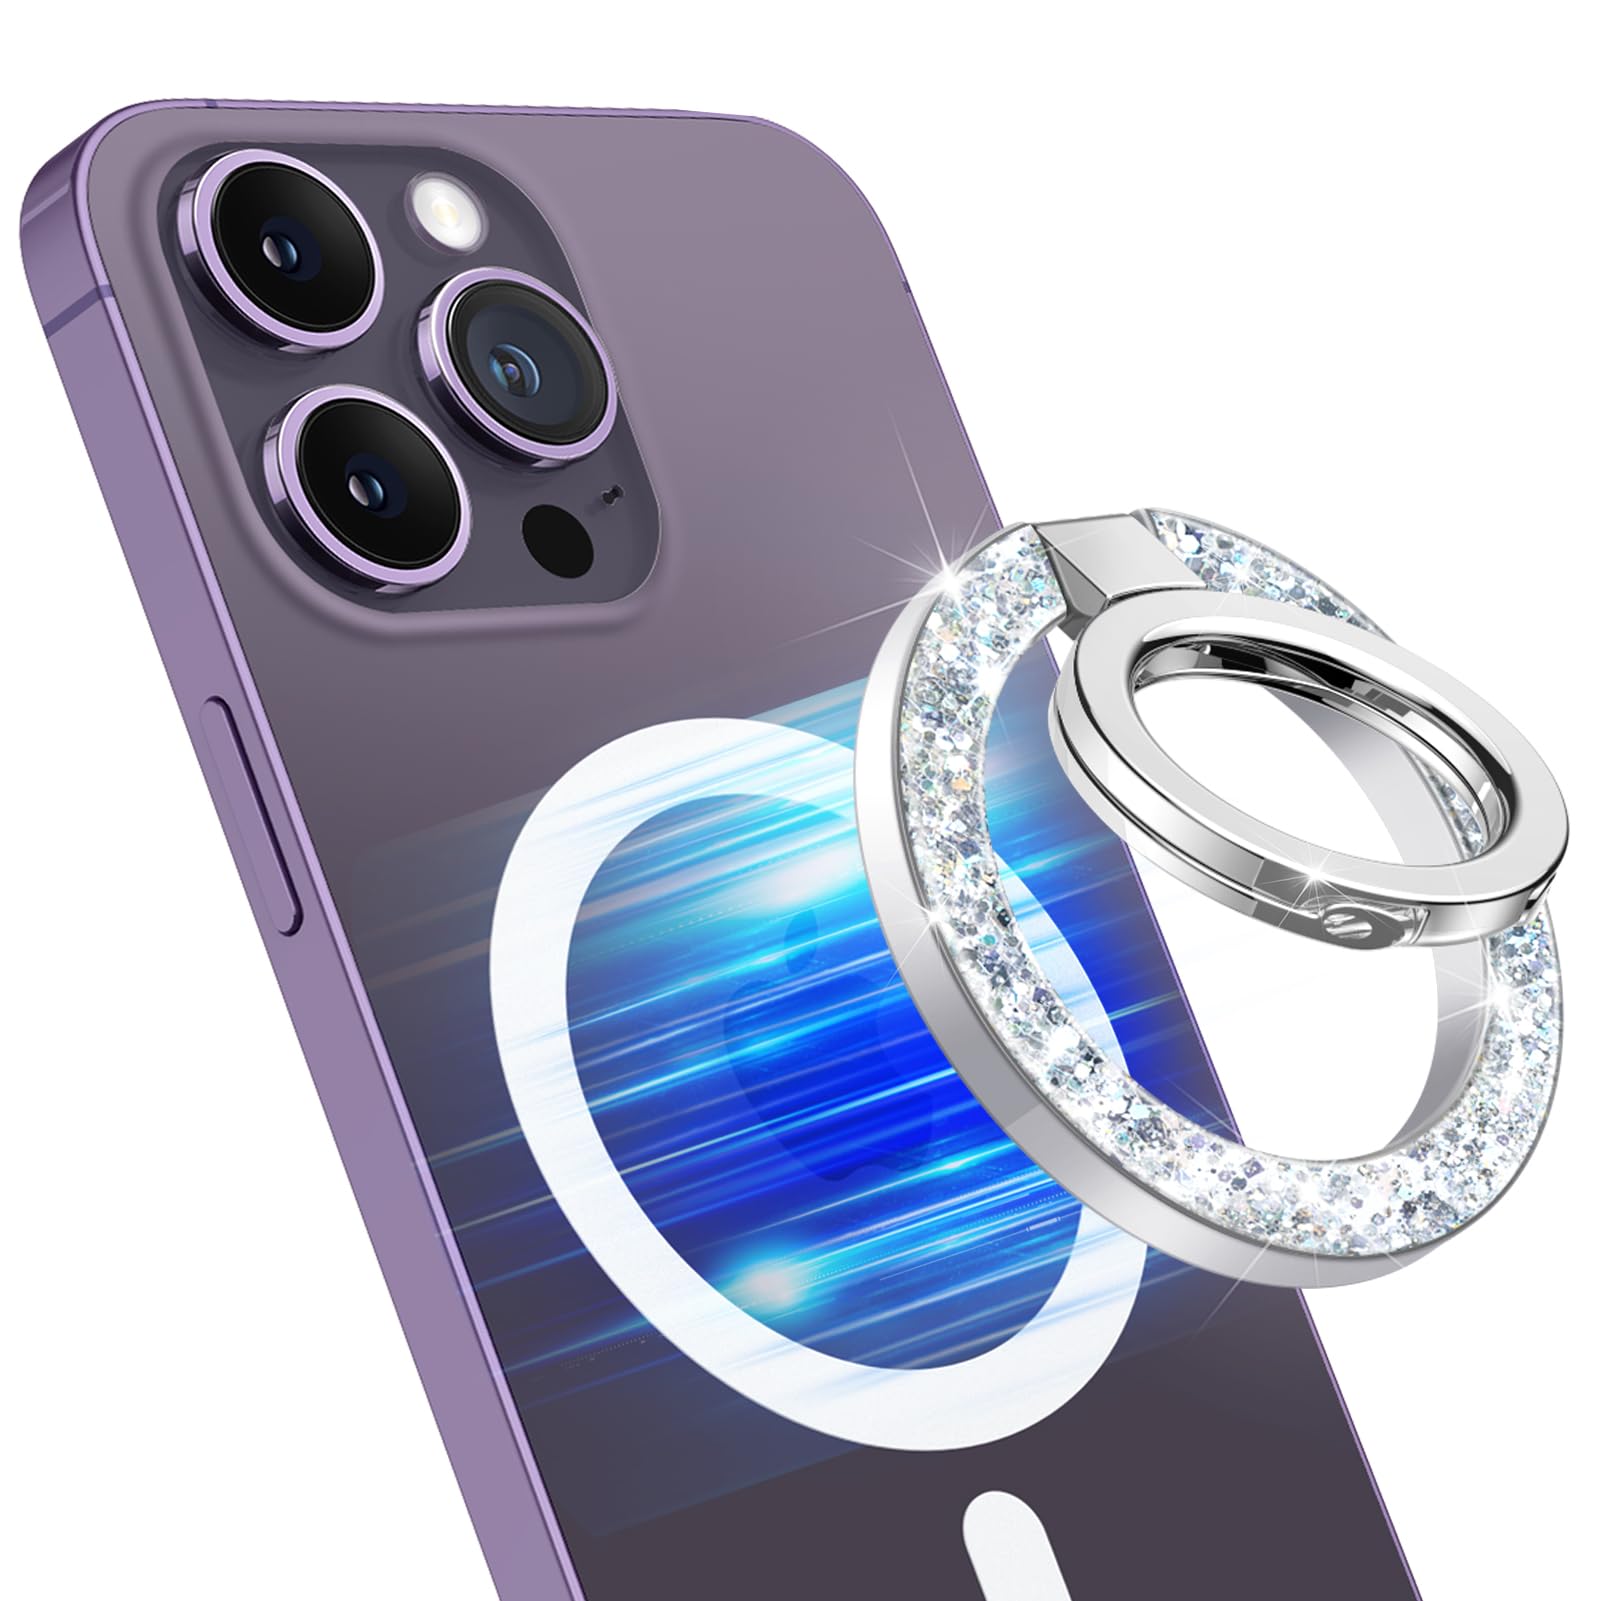 GVIEWIN Bundle - Compatible with iPhone 13 Pro Case (Hibicus) + Magnetic Phone Ring Holder (Glitter/Silver)